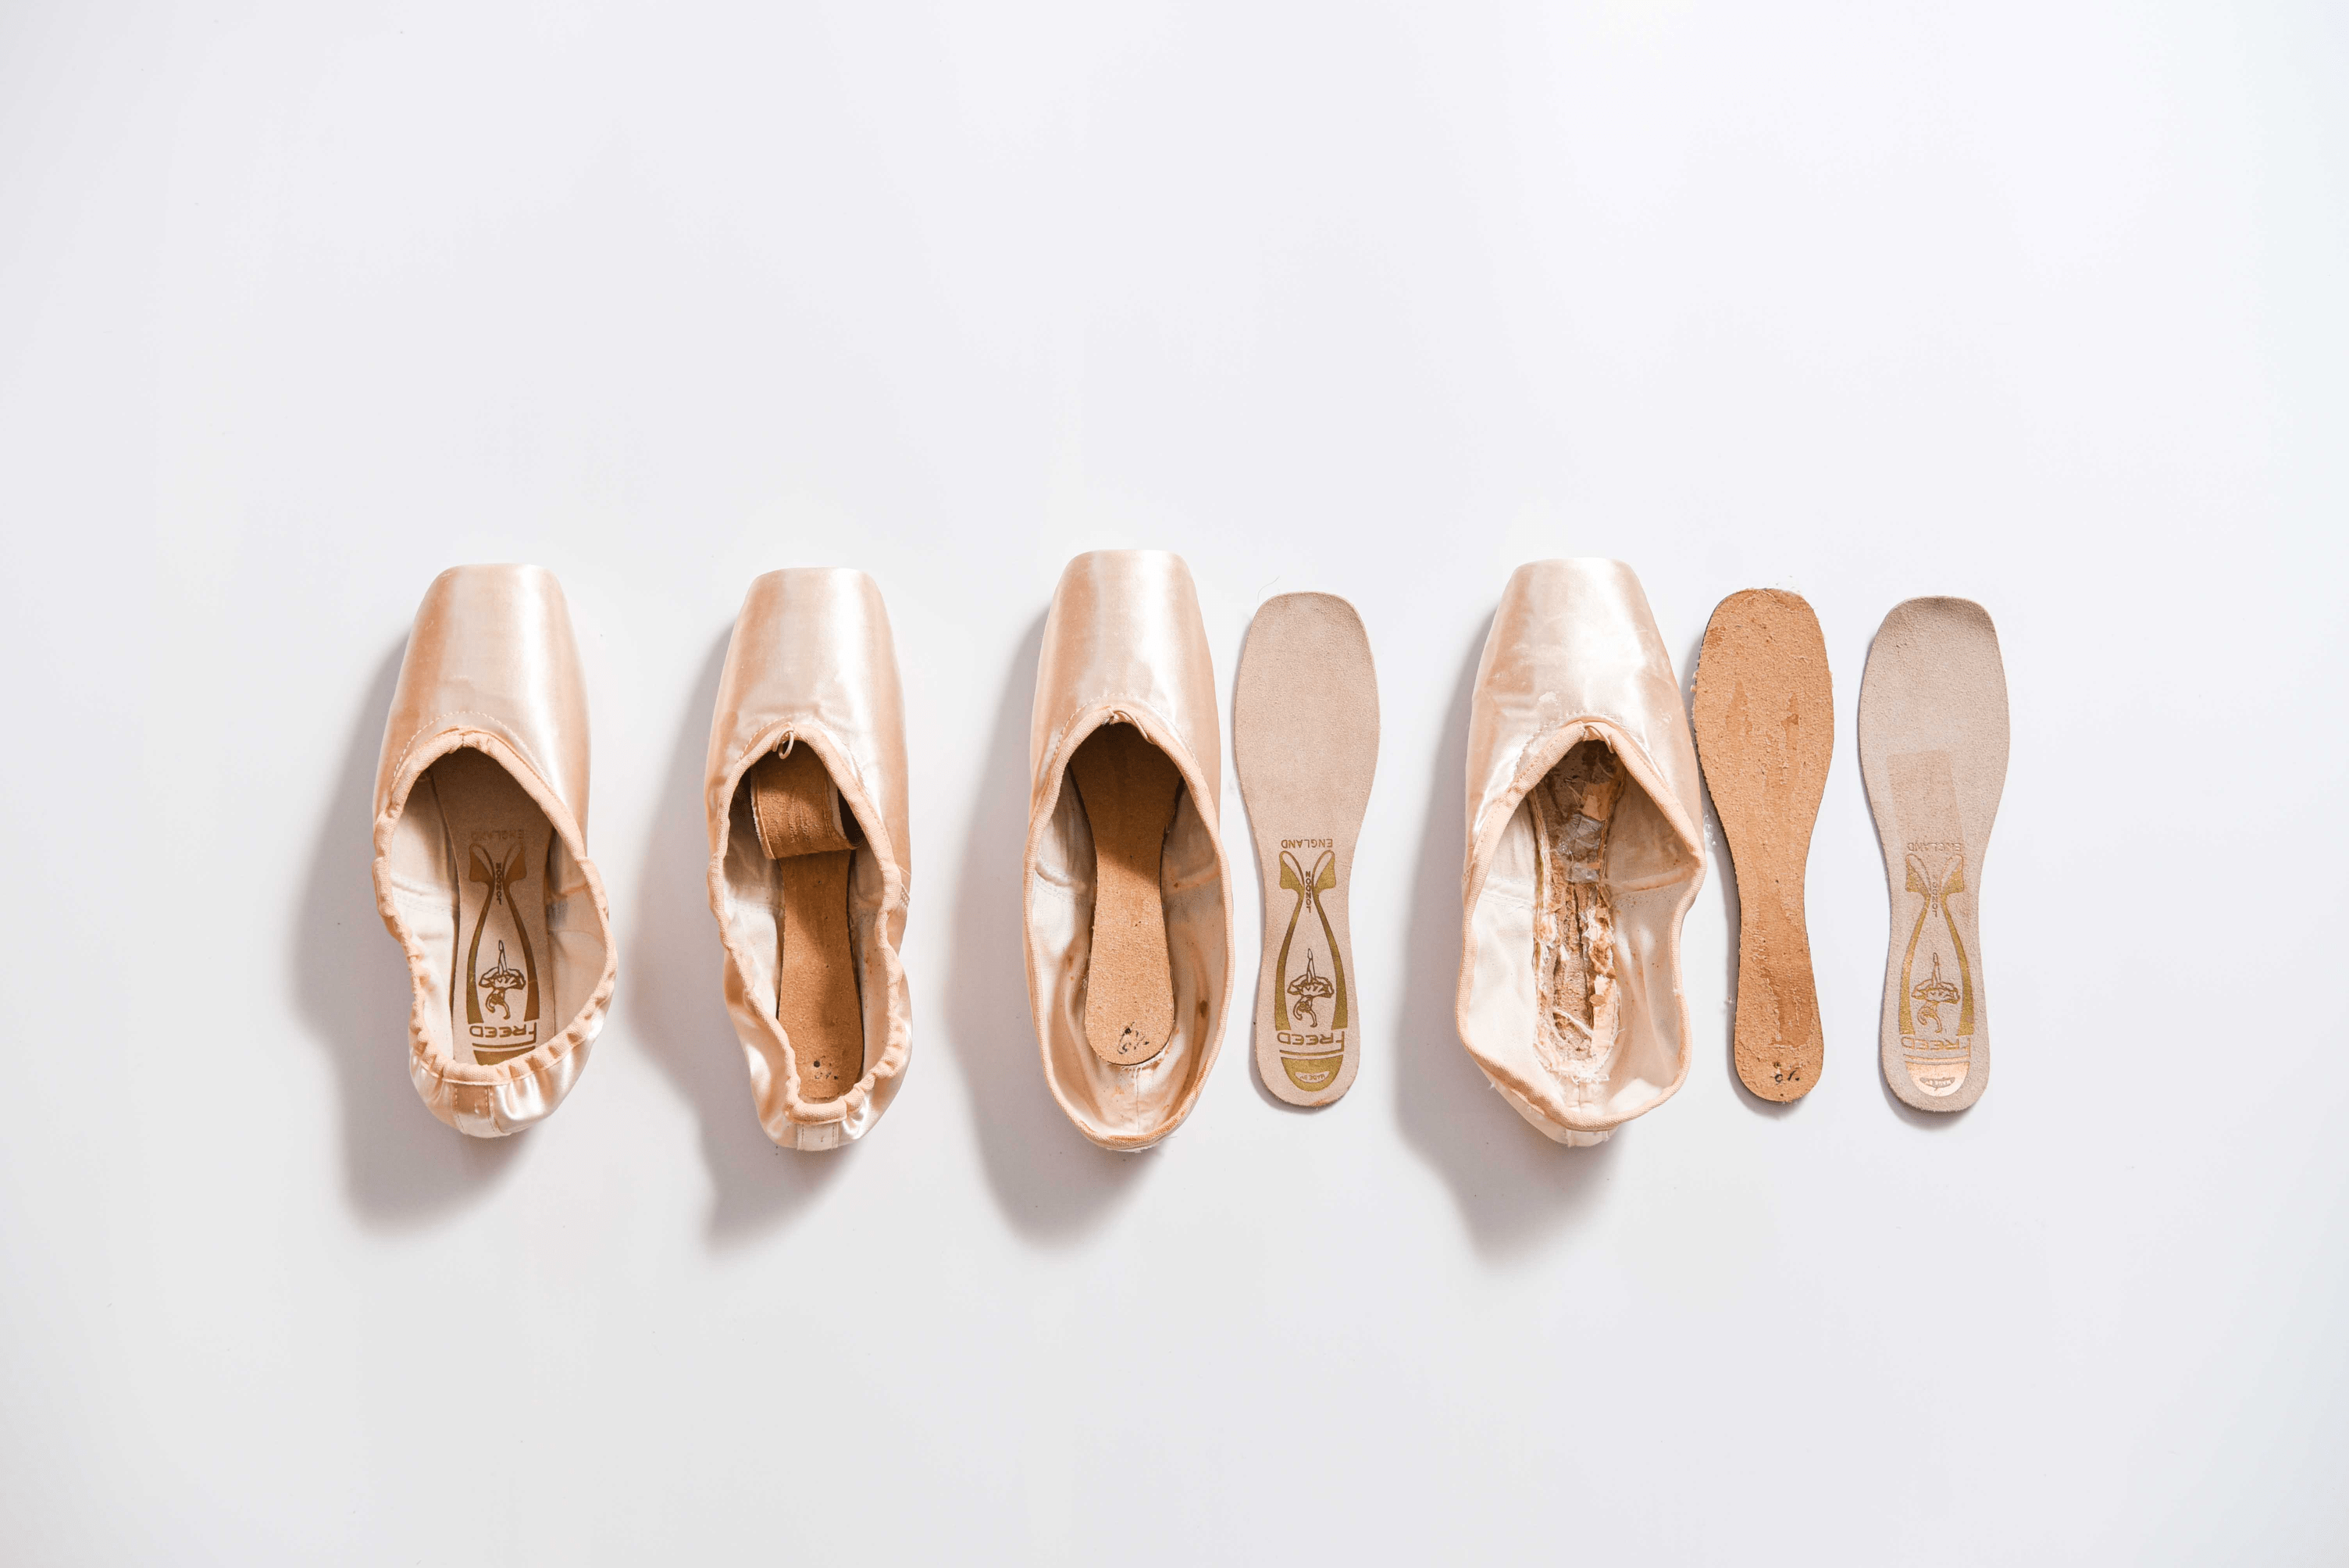 How to Make Soft Blocks from Old Pointe Shoes